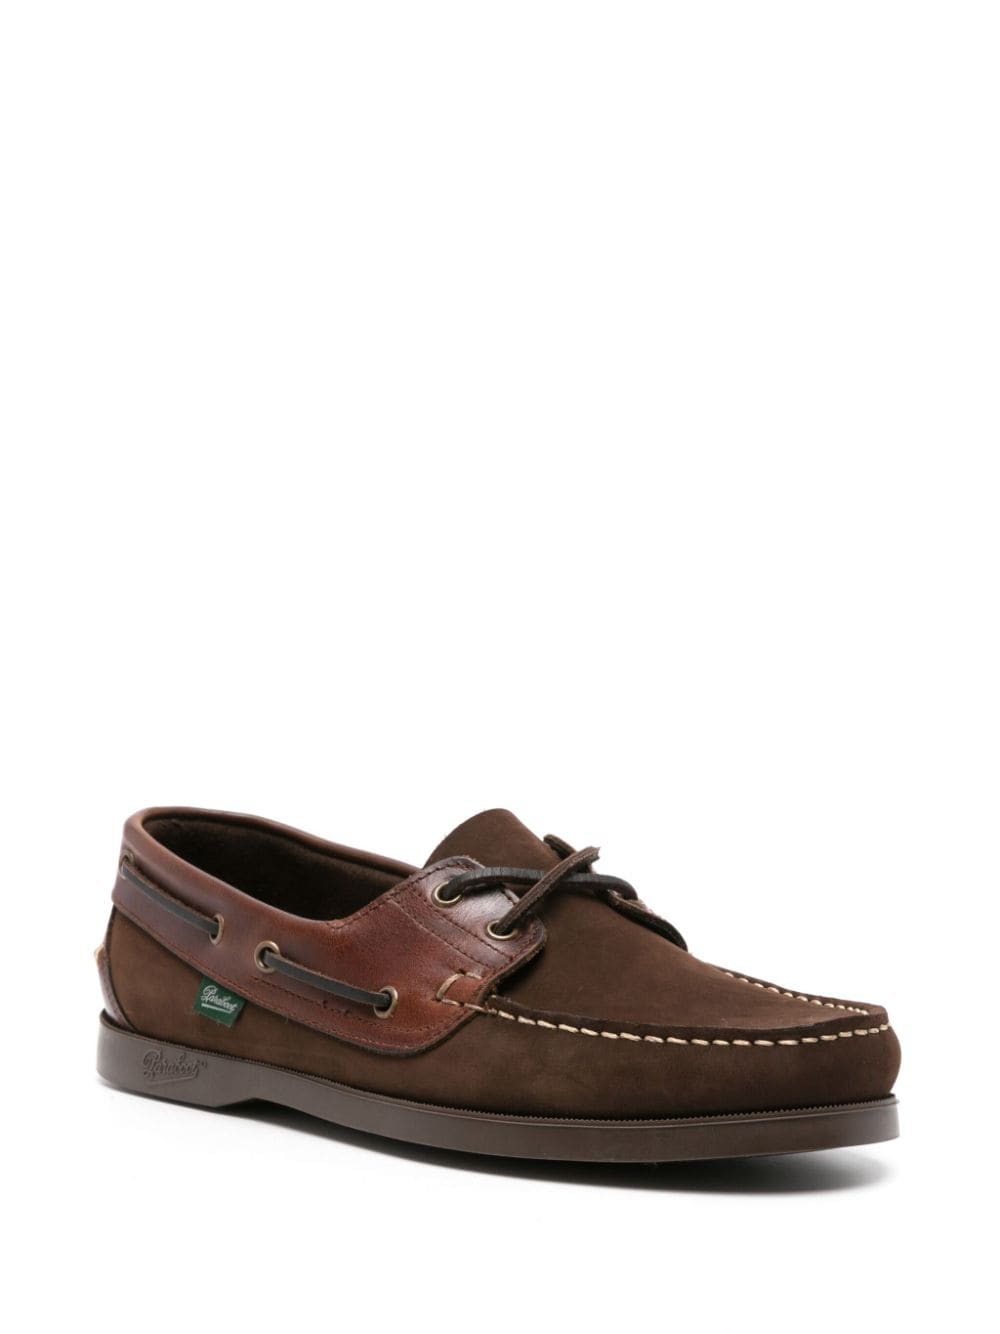 Paraboot Barth suede boat shoes - Bruin